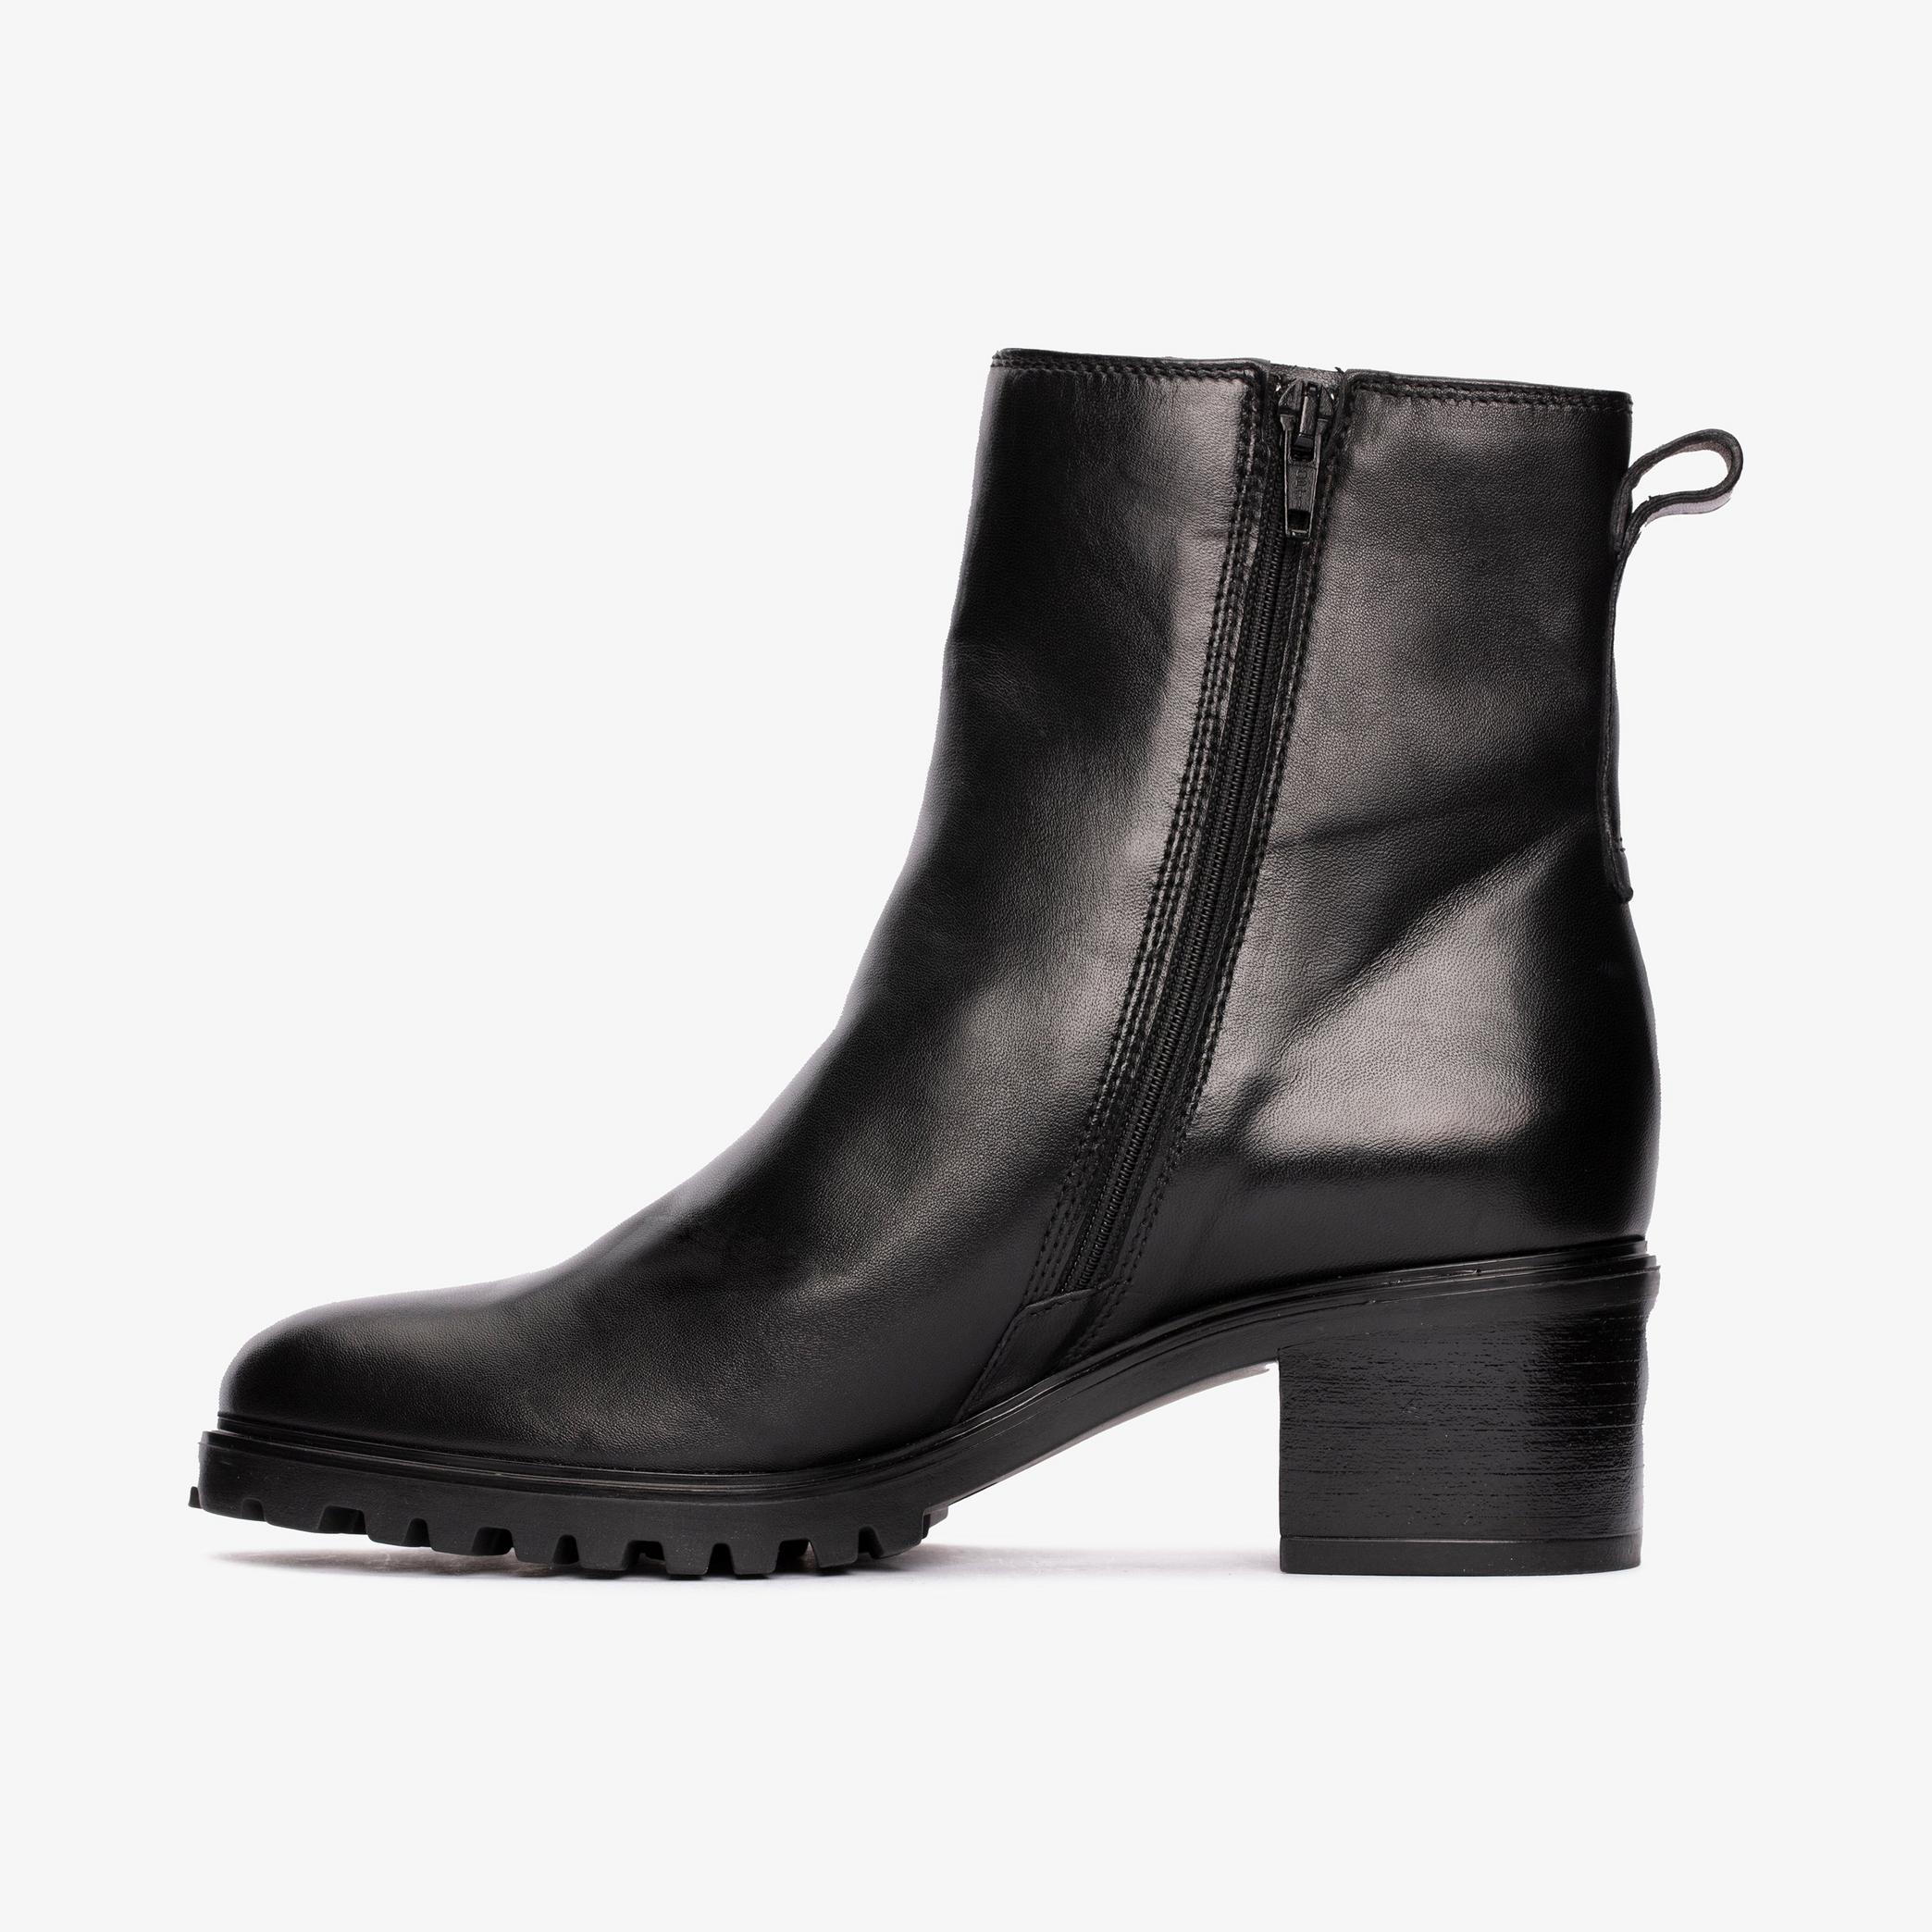 Meraleigh Zip Black Leather Ankle Boots, view 2 of 6